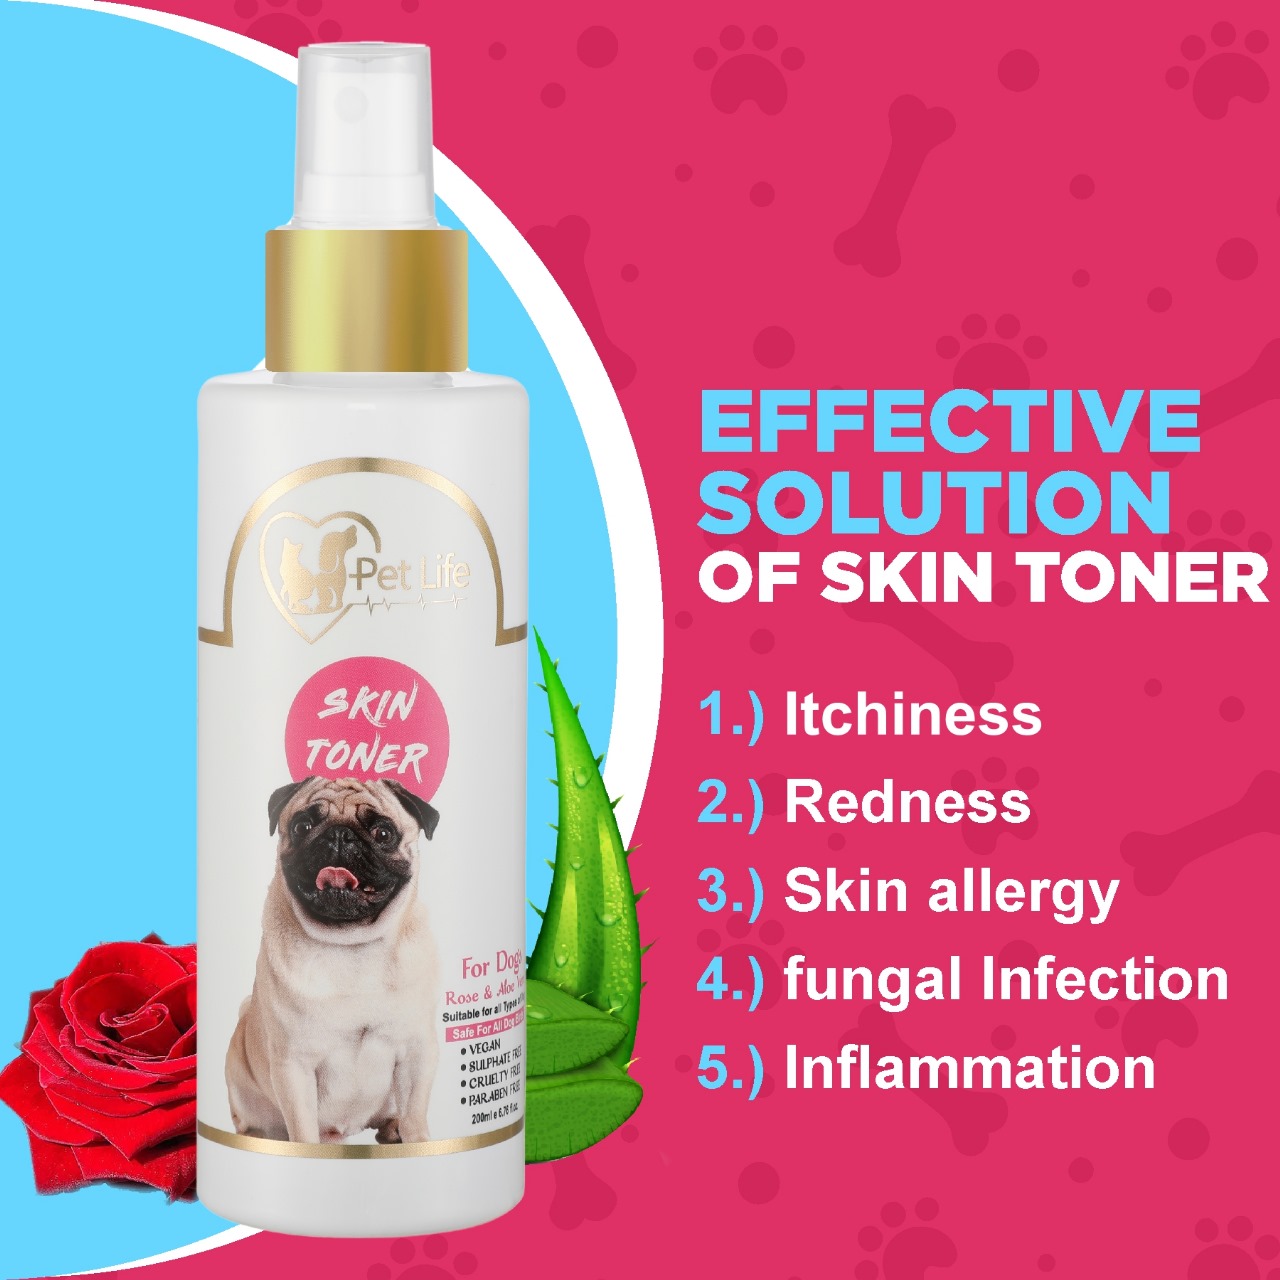 Pet Life Pure Organic Skin Toner Spray Help to minimize Allergy, Redness, Itchiness, Fungal Infection, Restores Skin Health & Moisture for All Cat Breed